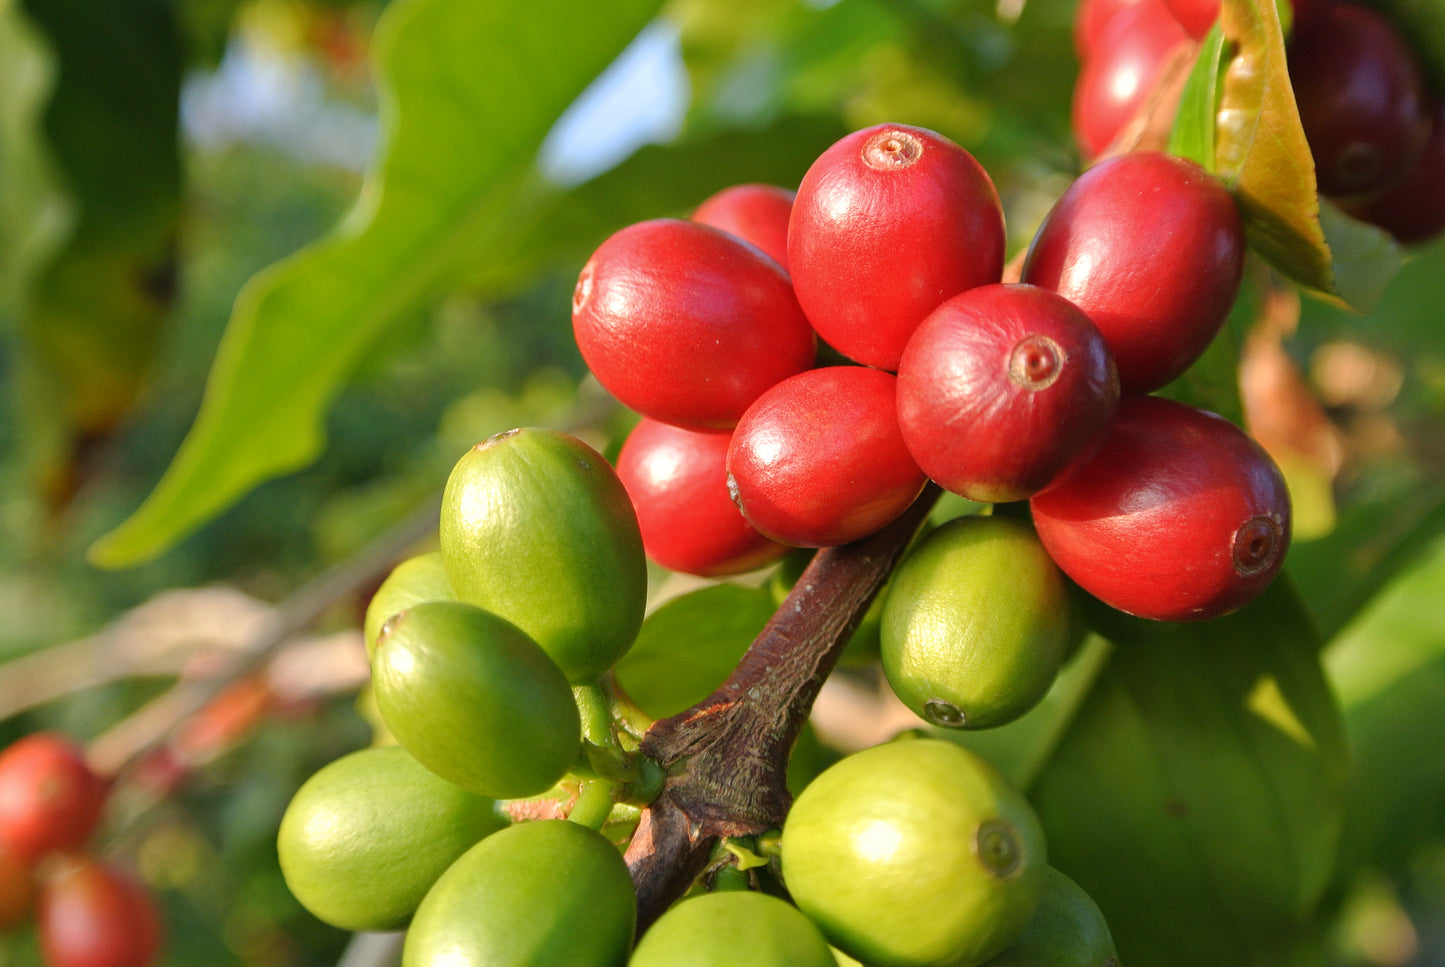 TIL the coffee bean is actually just the pit of a bright red fruit